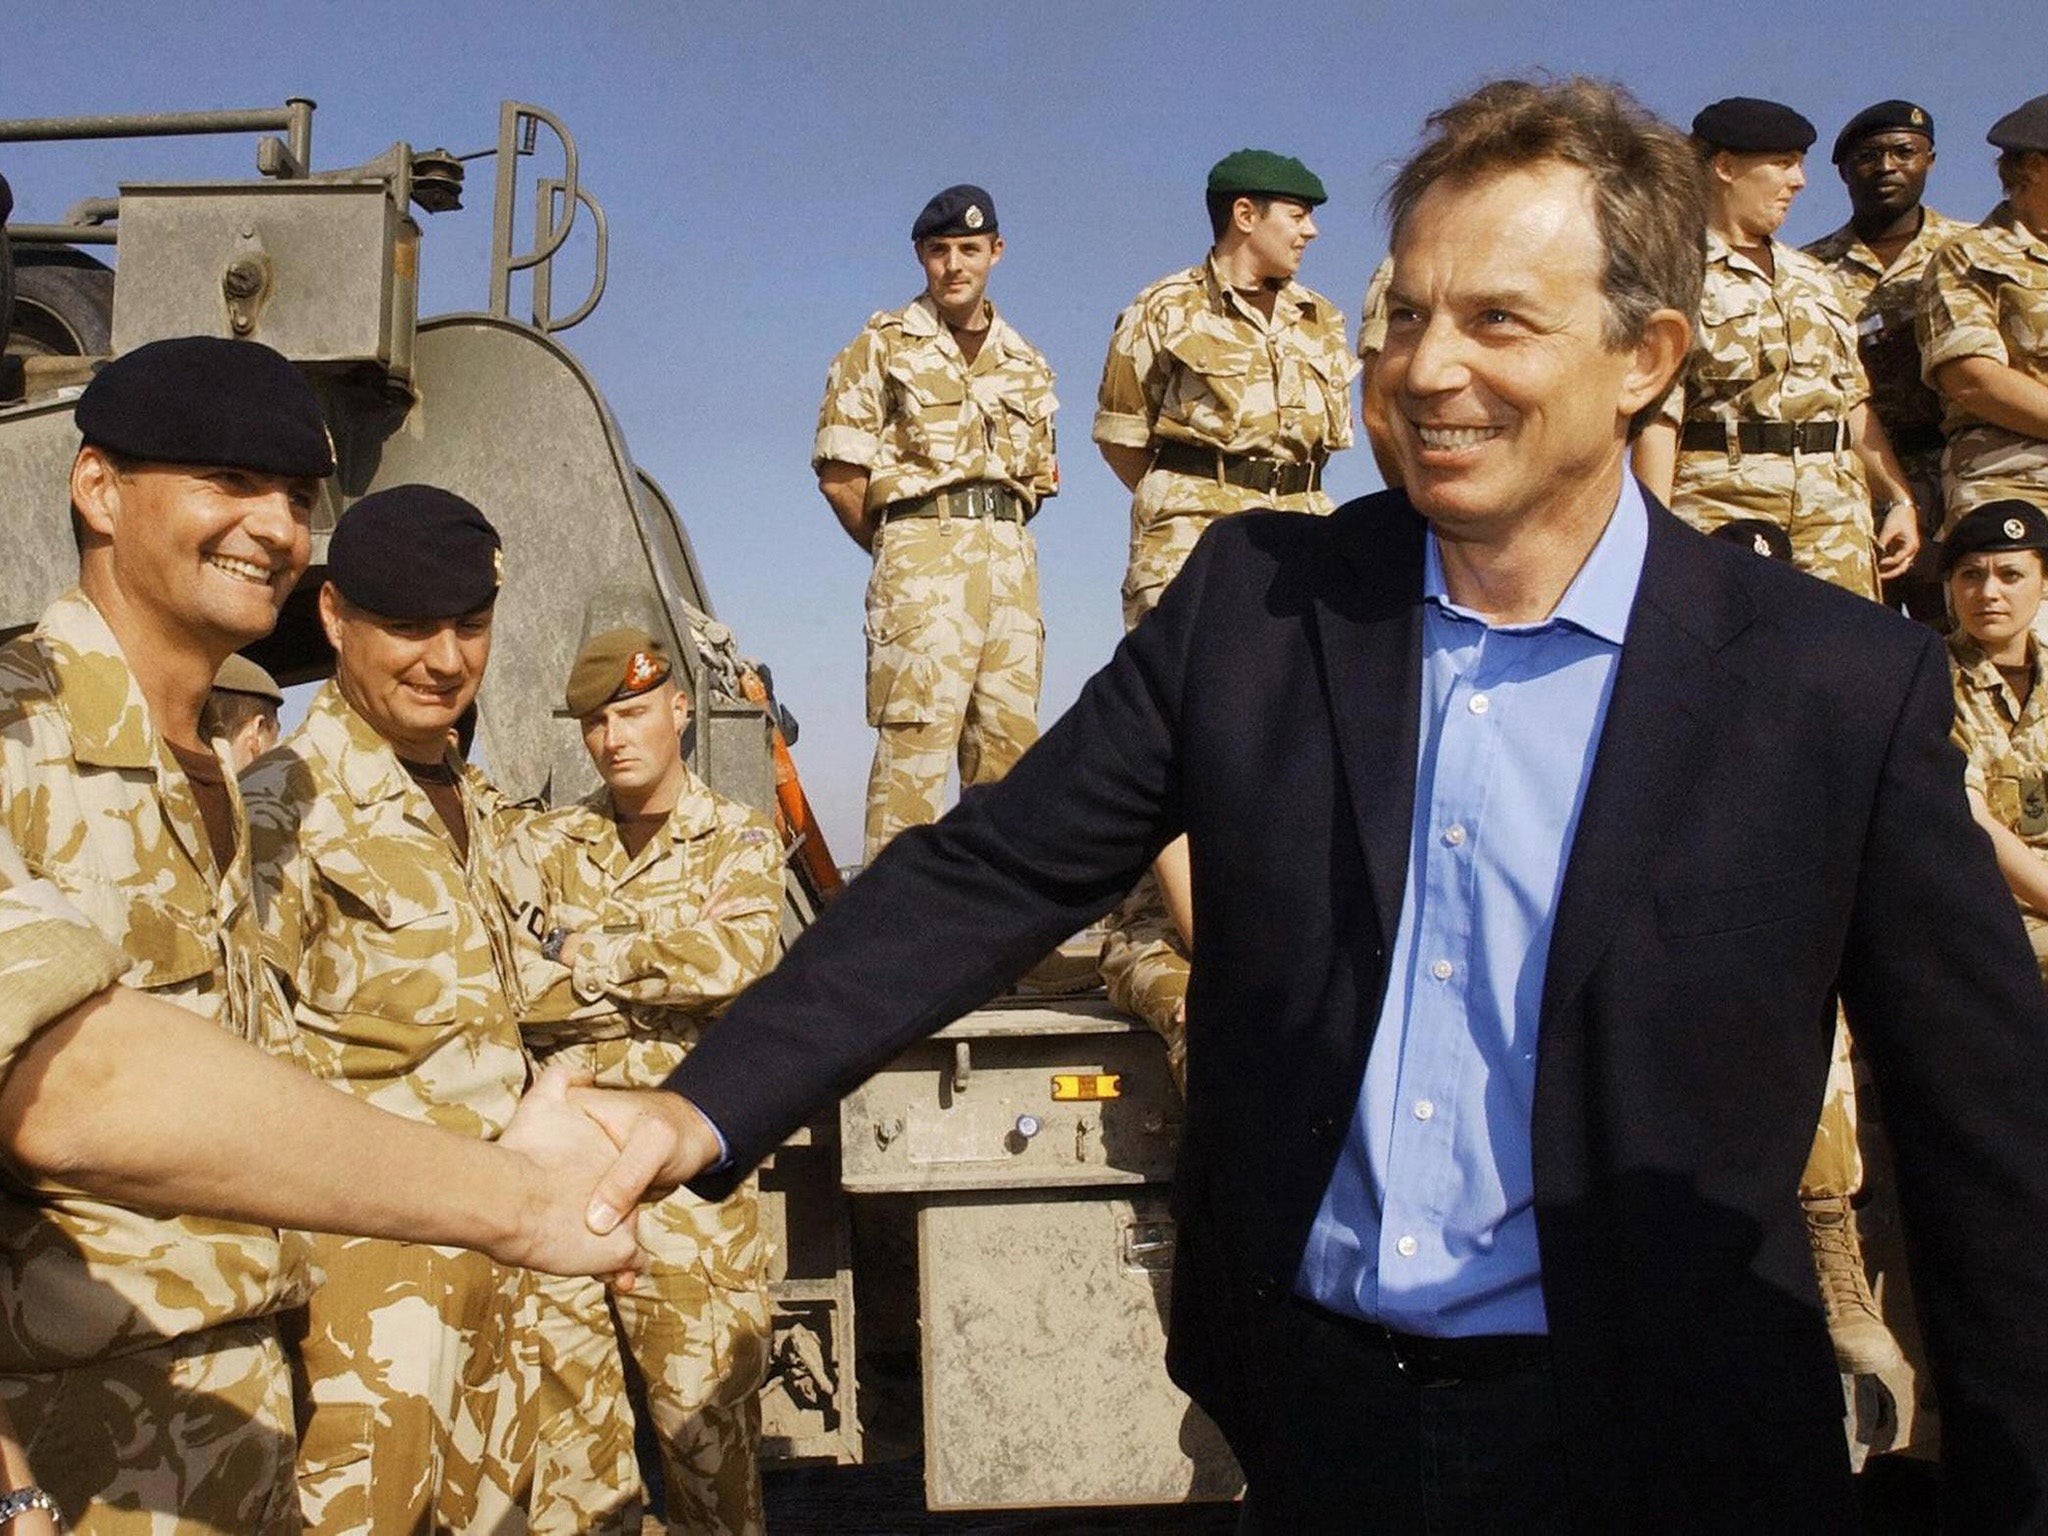 Tony Blair meeting troops in Basra in January 2004. He is expected to be criticised by the Chilcot report for his conduct in the run up to the invasion